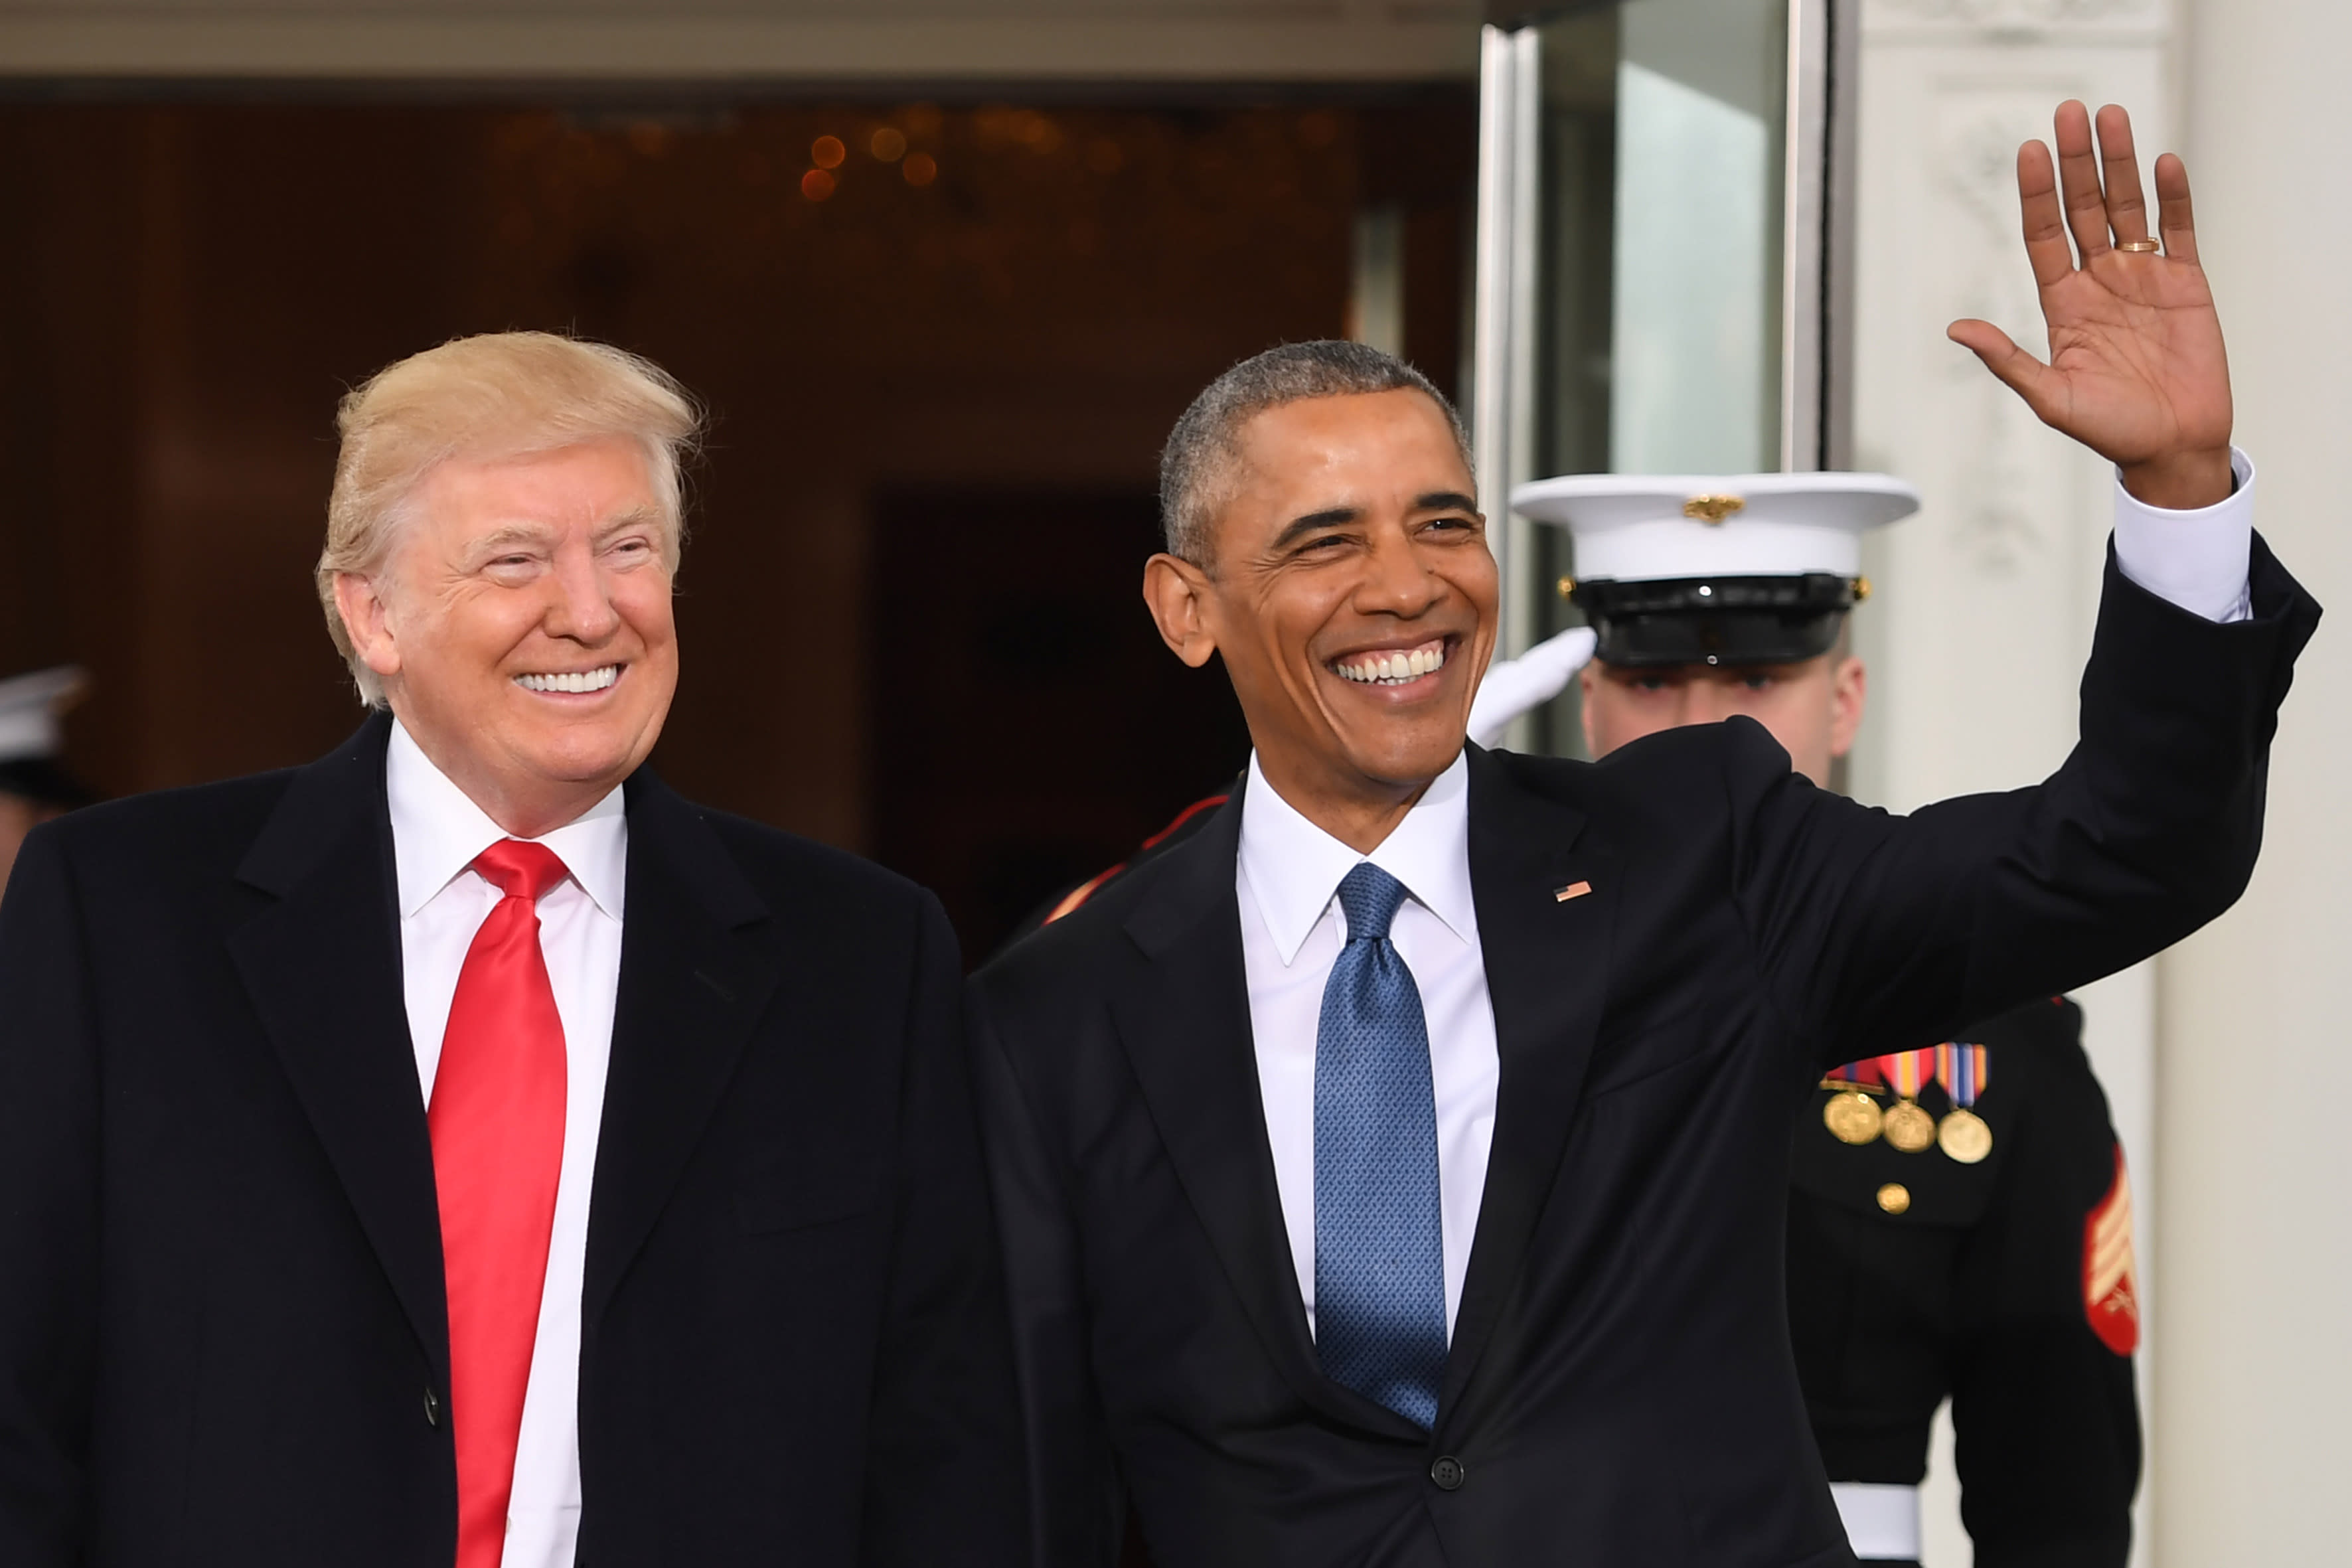 Obama meets Trump, departs White House for last time as president